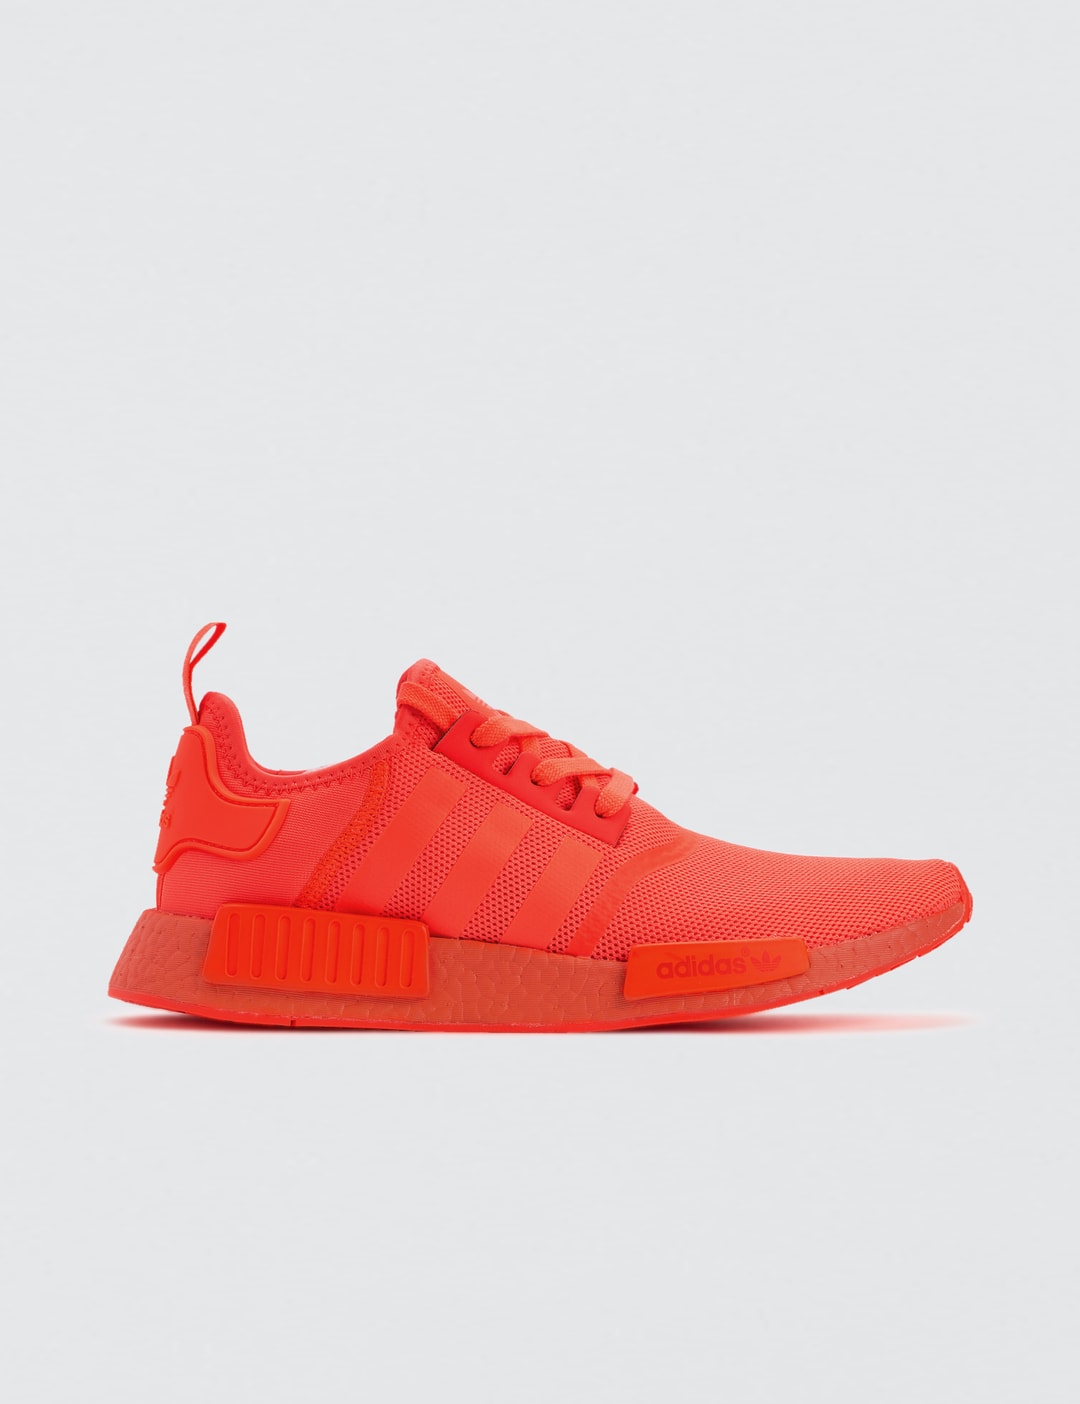 Adidas Originals - NMD | HBX - Globally Fashion and Lifestyle by Hypebeast